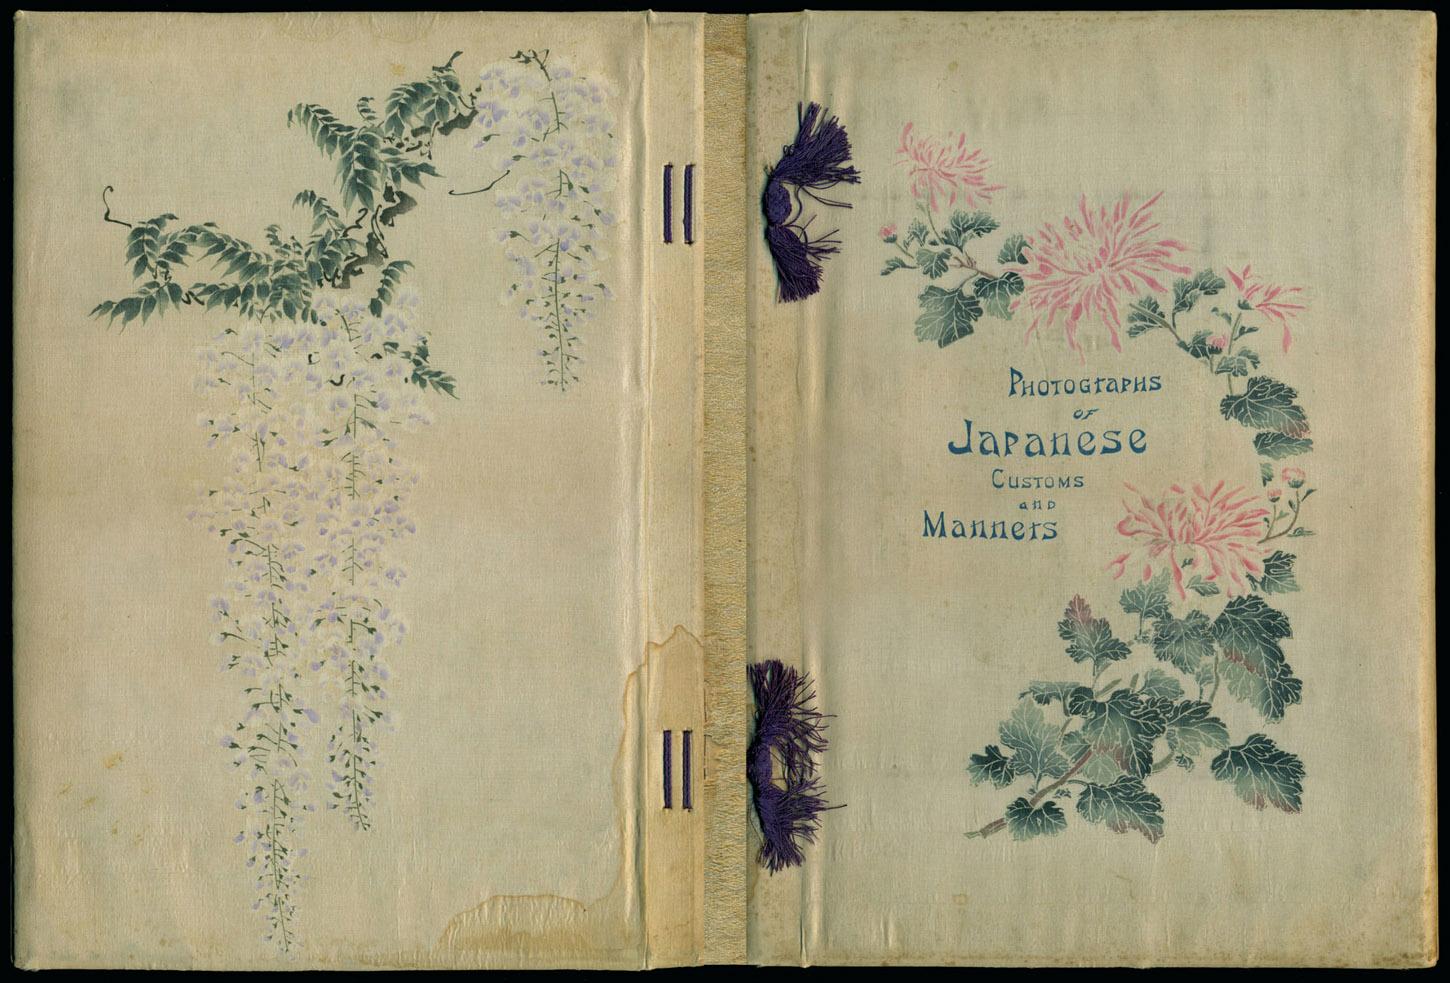 Photographs of Japanese Customs and Manners by K. Ogawa, Meiji 31 